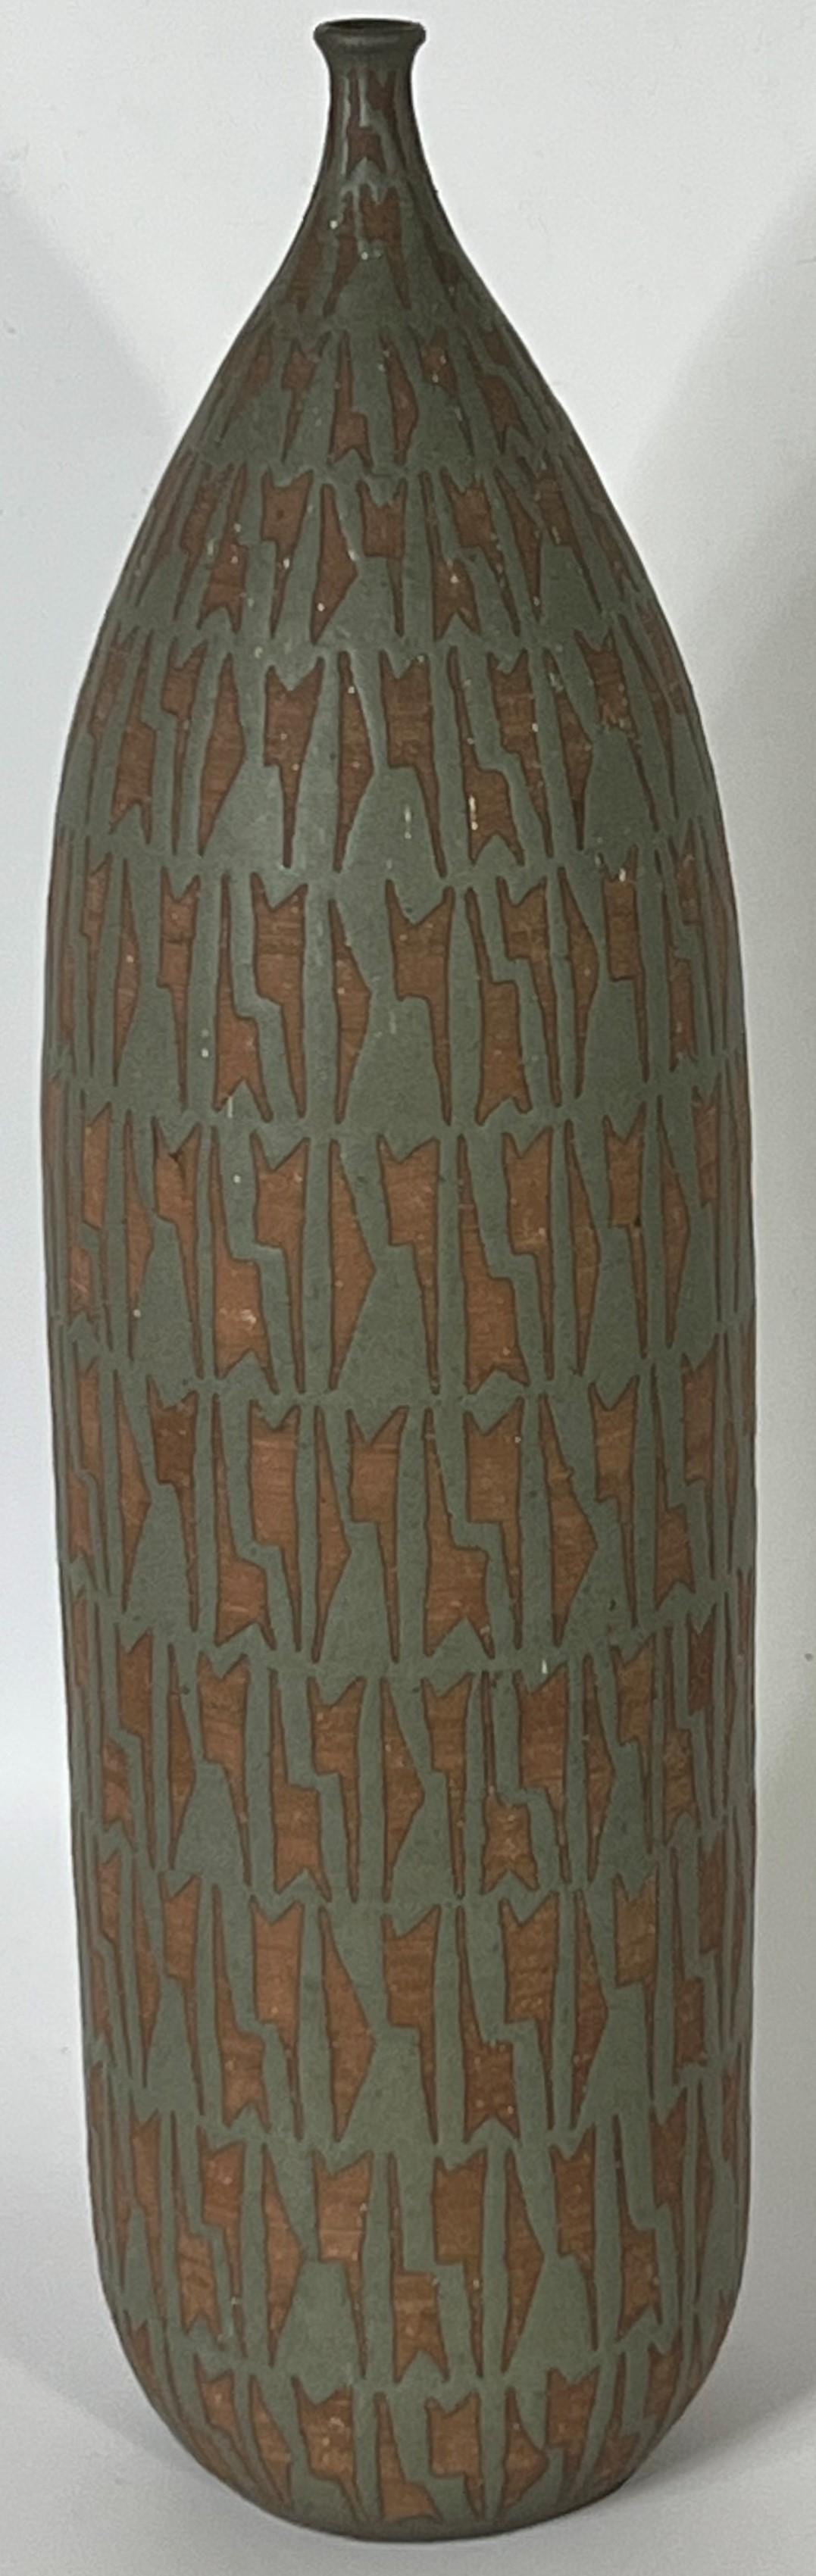 A monumental weed vase by studio potter Clyde Burt.  This is 20